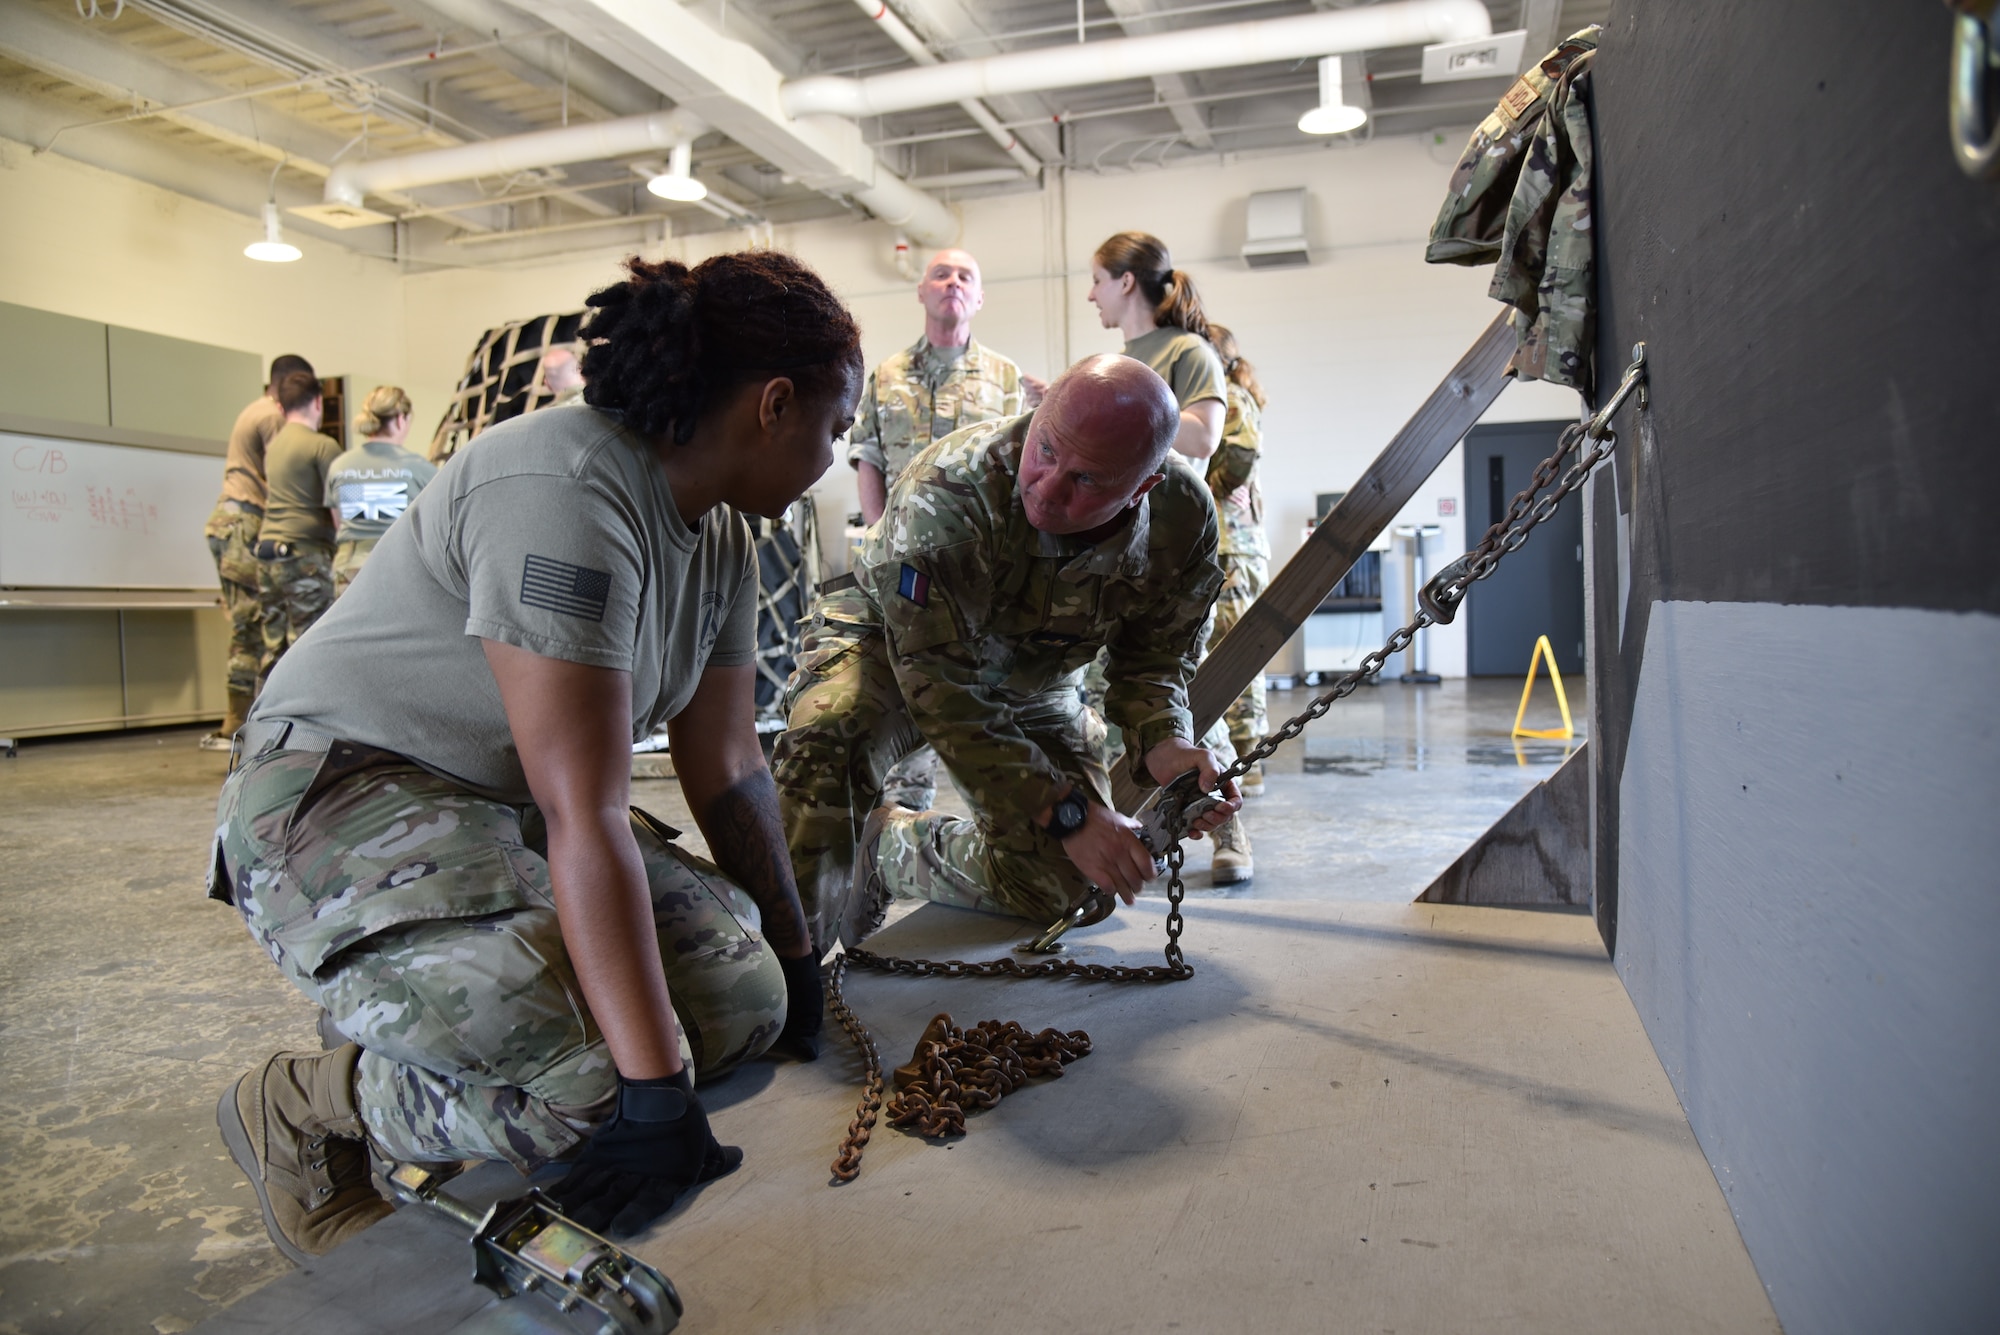 Female Air Force Reserve Airman talking the British Royal Air Force Warrant Officer through how the US tie down chain equipment works.